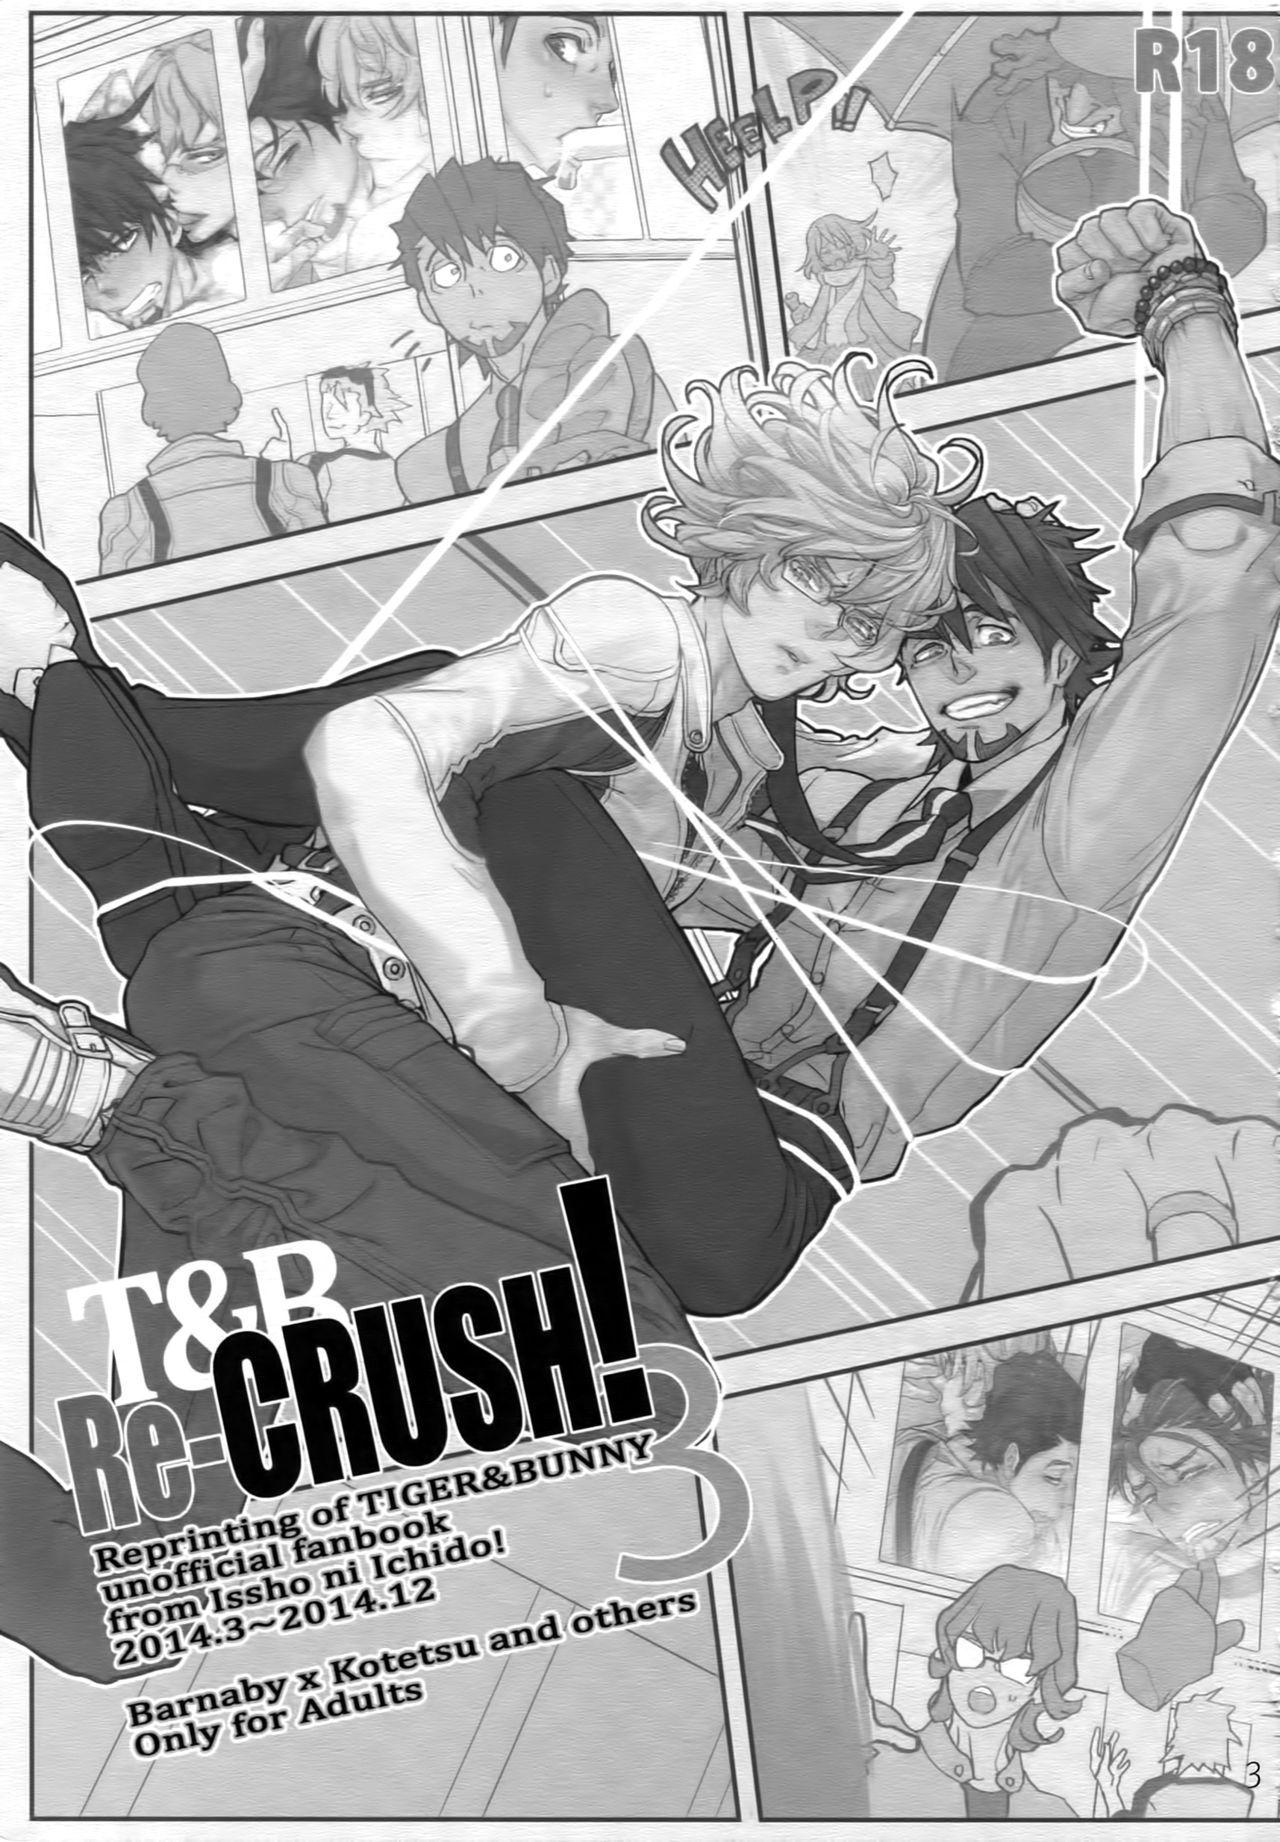 Mmd T&B Re-CRUSH!3 - Tiger and bunny Asslick - Page 2